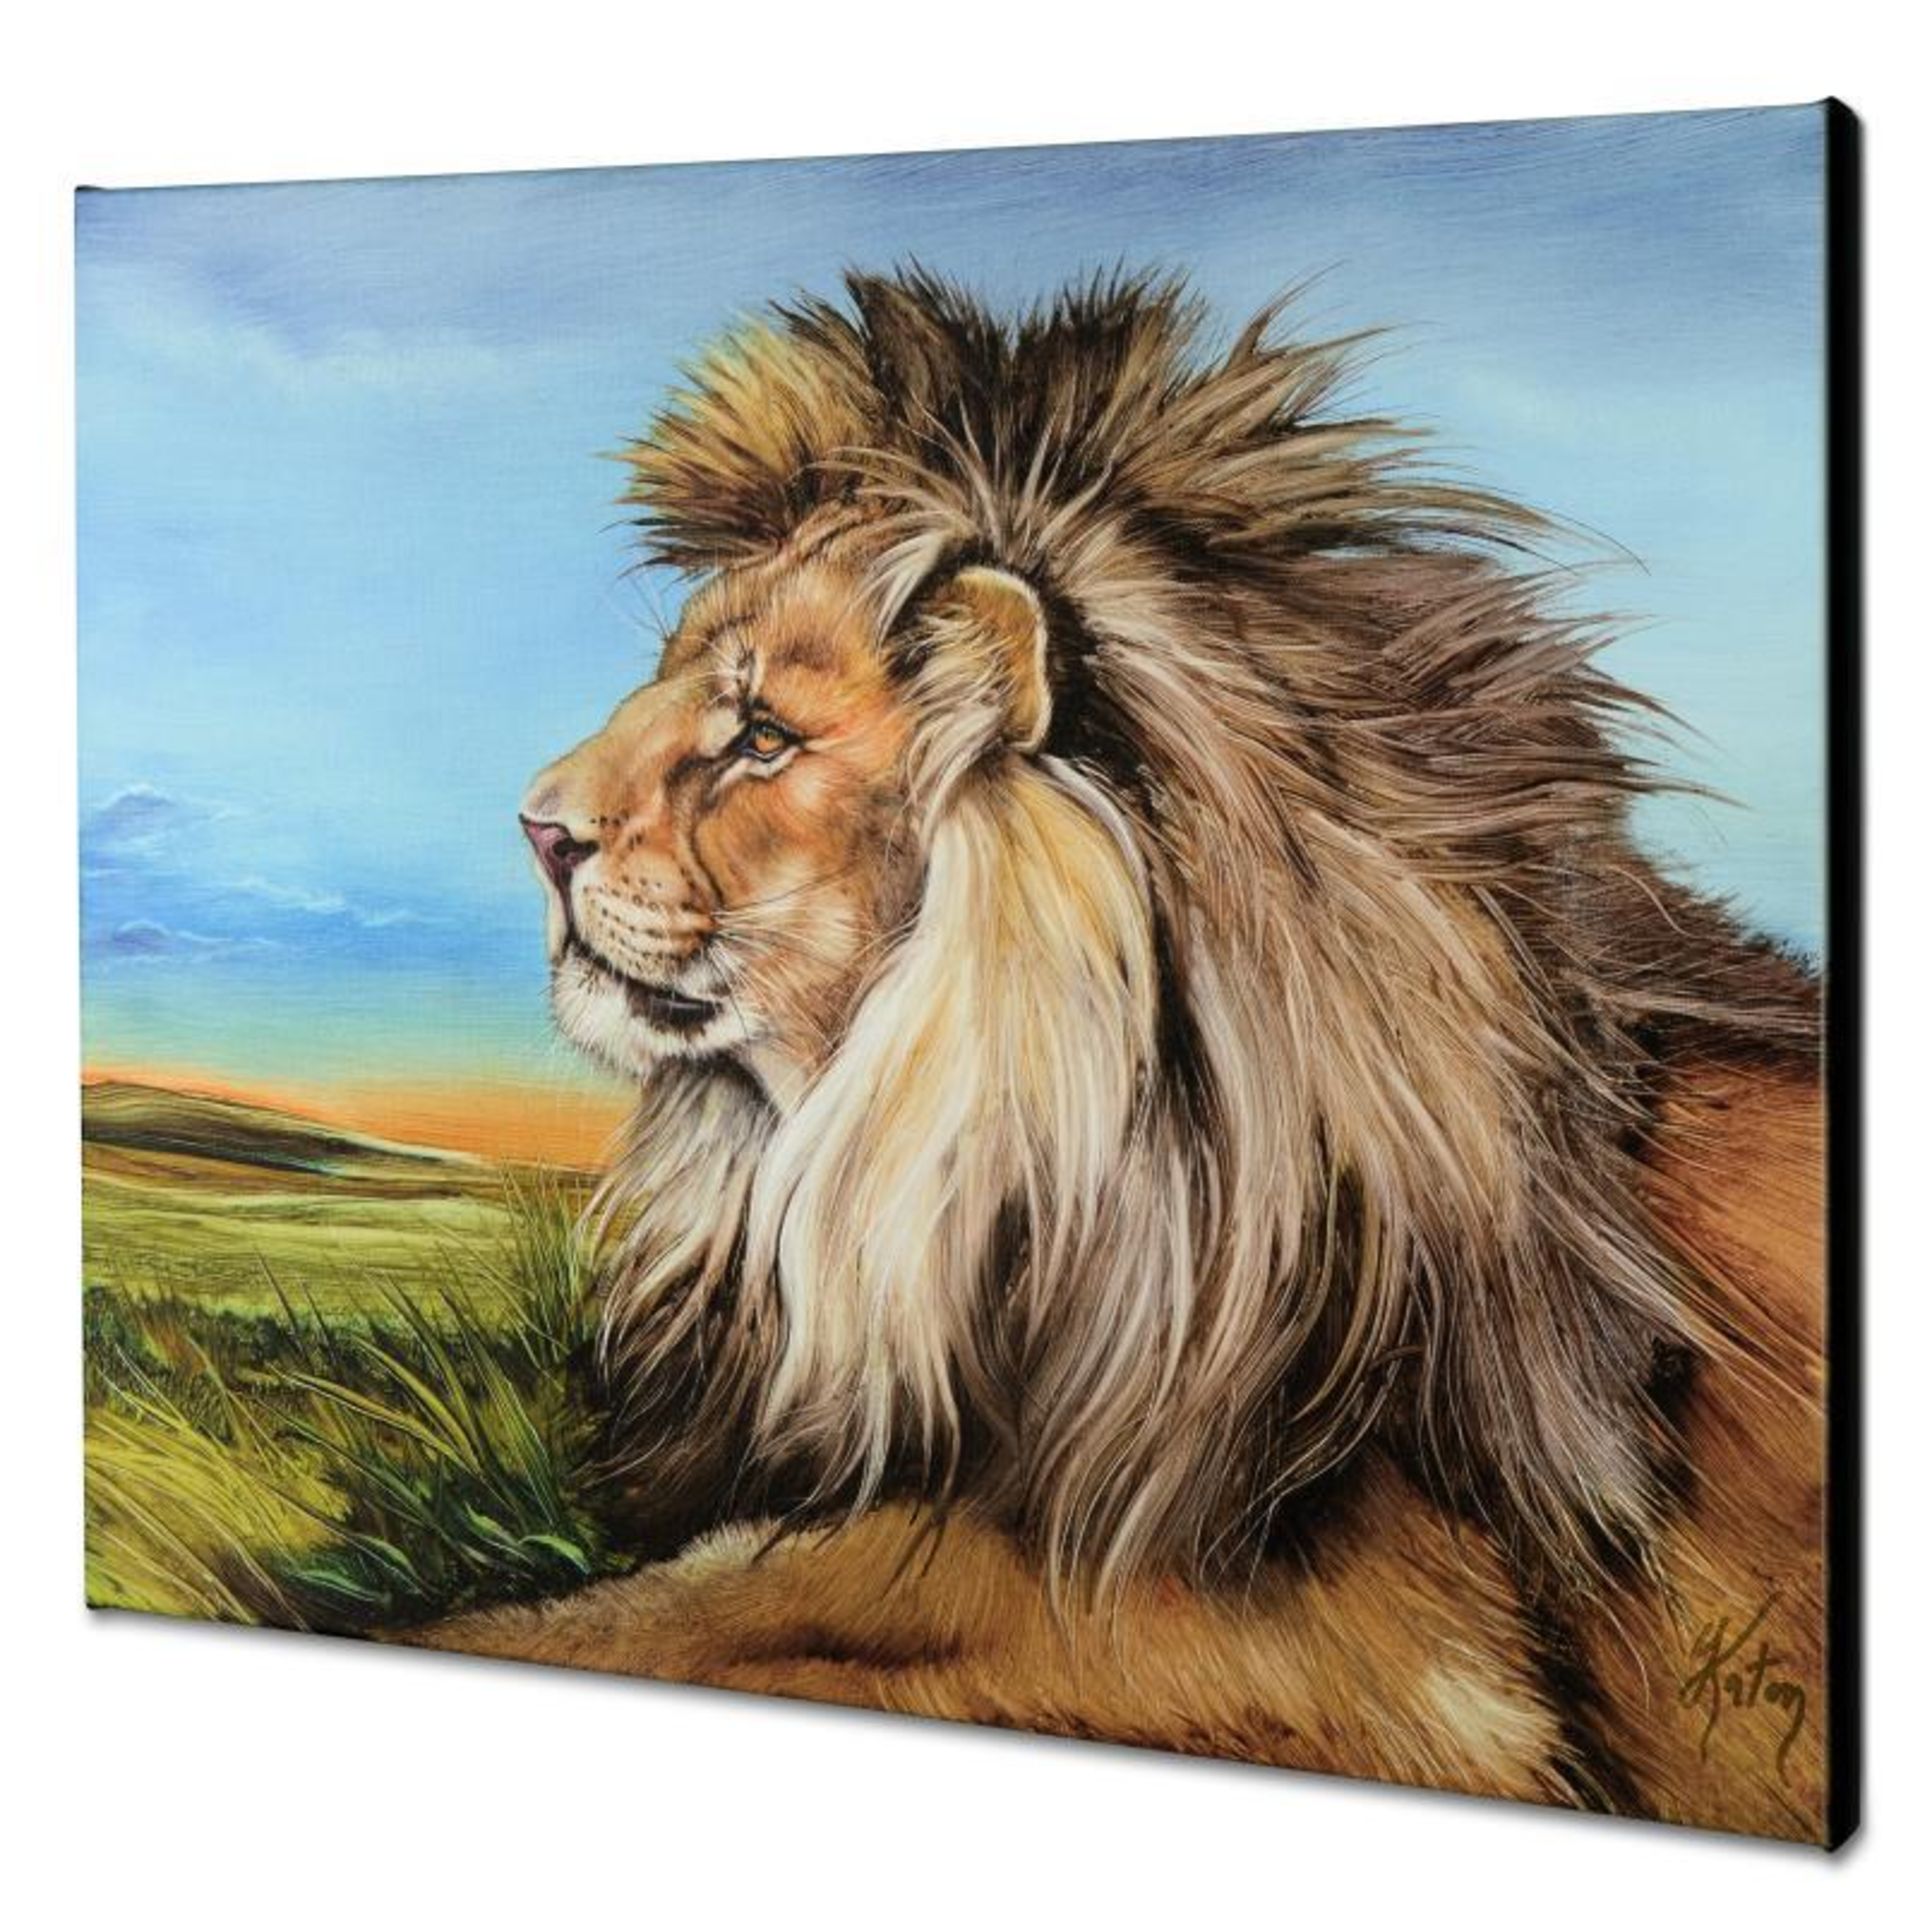 "Guardian Lion" Limited Edition Giclee on Canvas by Martin Katon, Numbered and H - Image 2 of 2